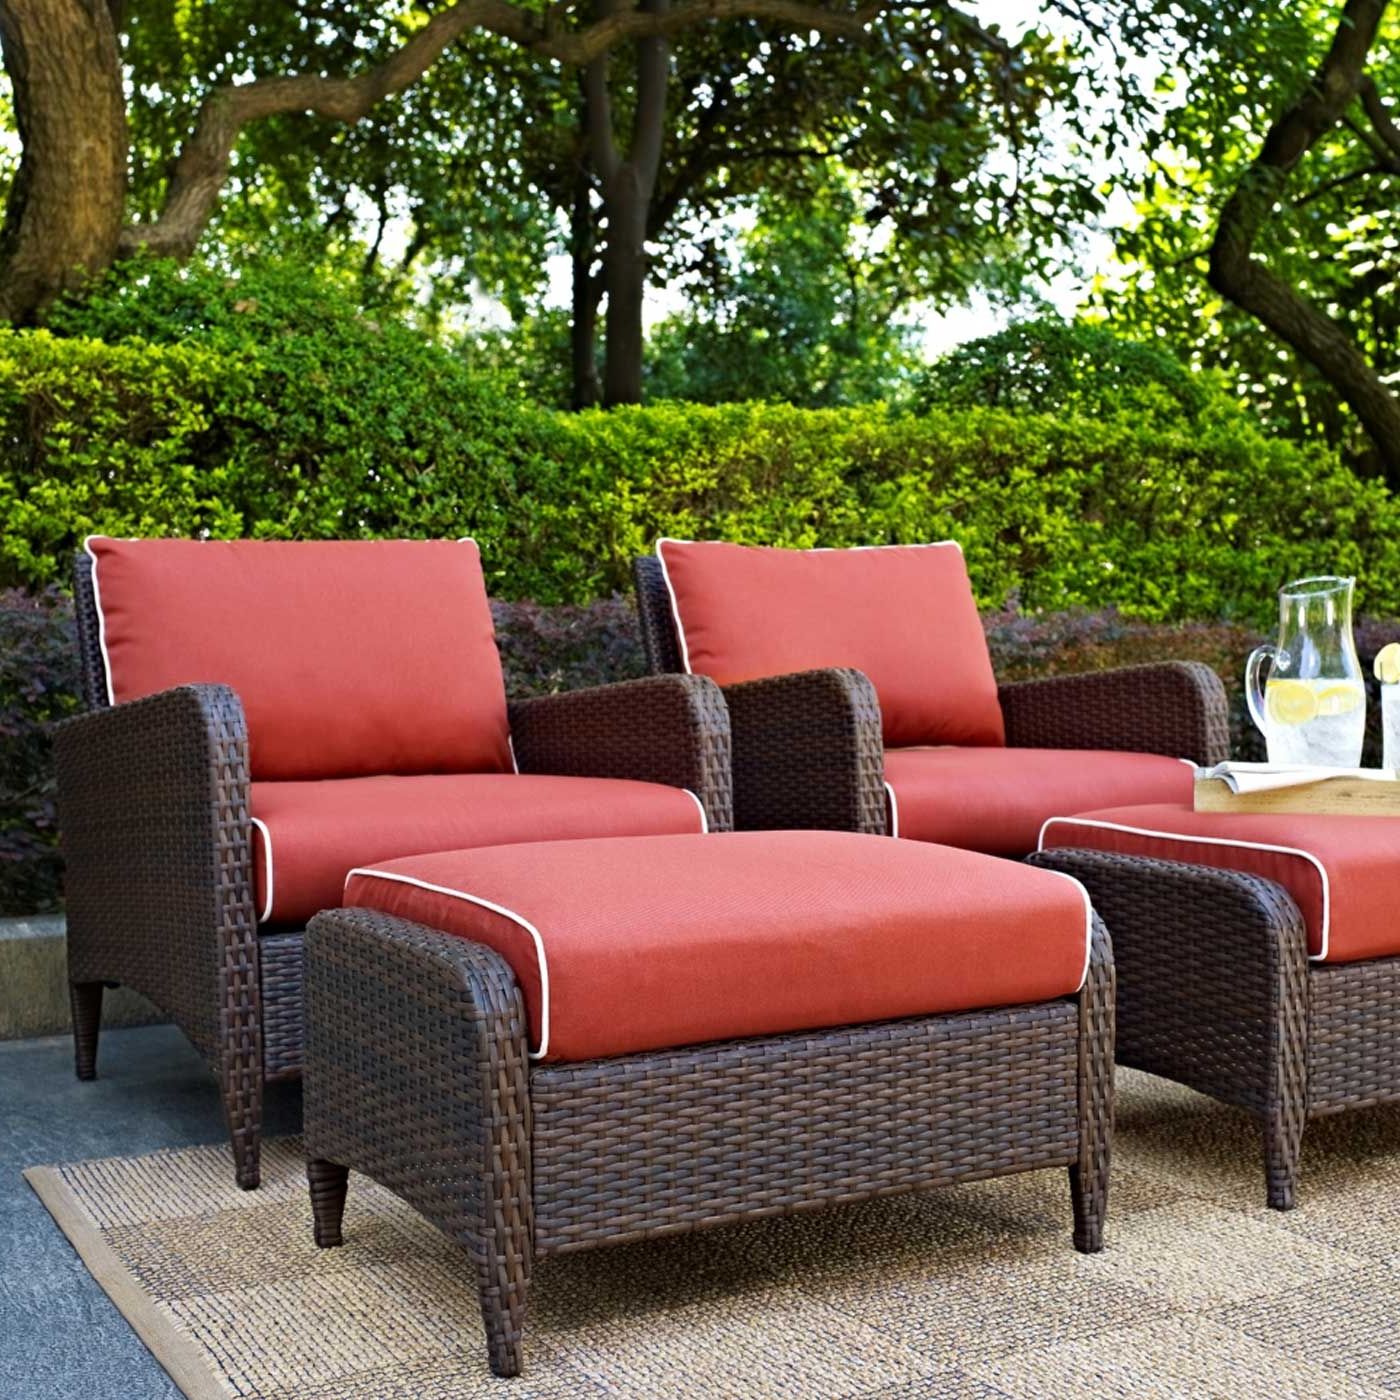 Famous Crosley Kiawah 4 Piece Outdoor Wicker Seating Set With Sangria Cushions With 4 Piece Outdoor Seating Patio Sets (View 1 of 15)